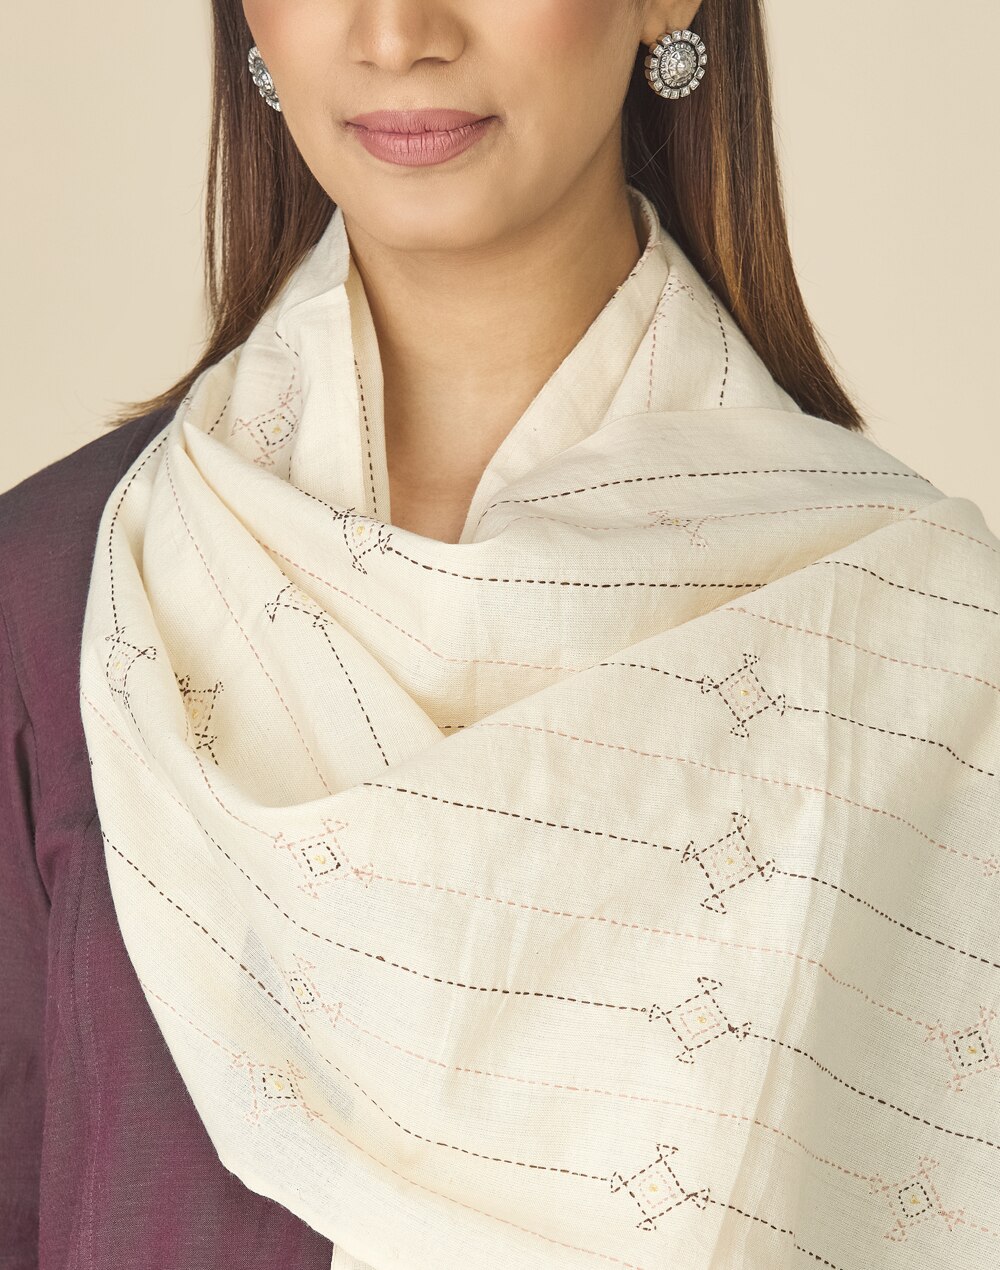 Desert Embroidered Contrast Border Cotton Stole